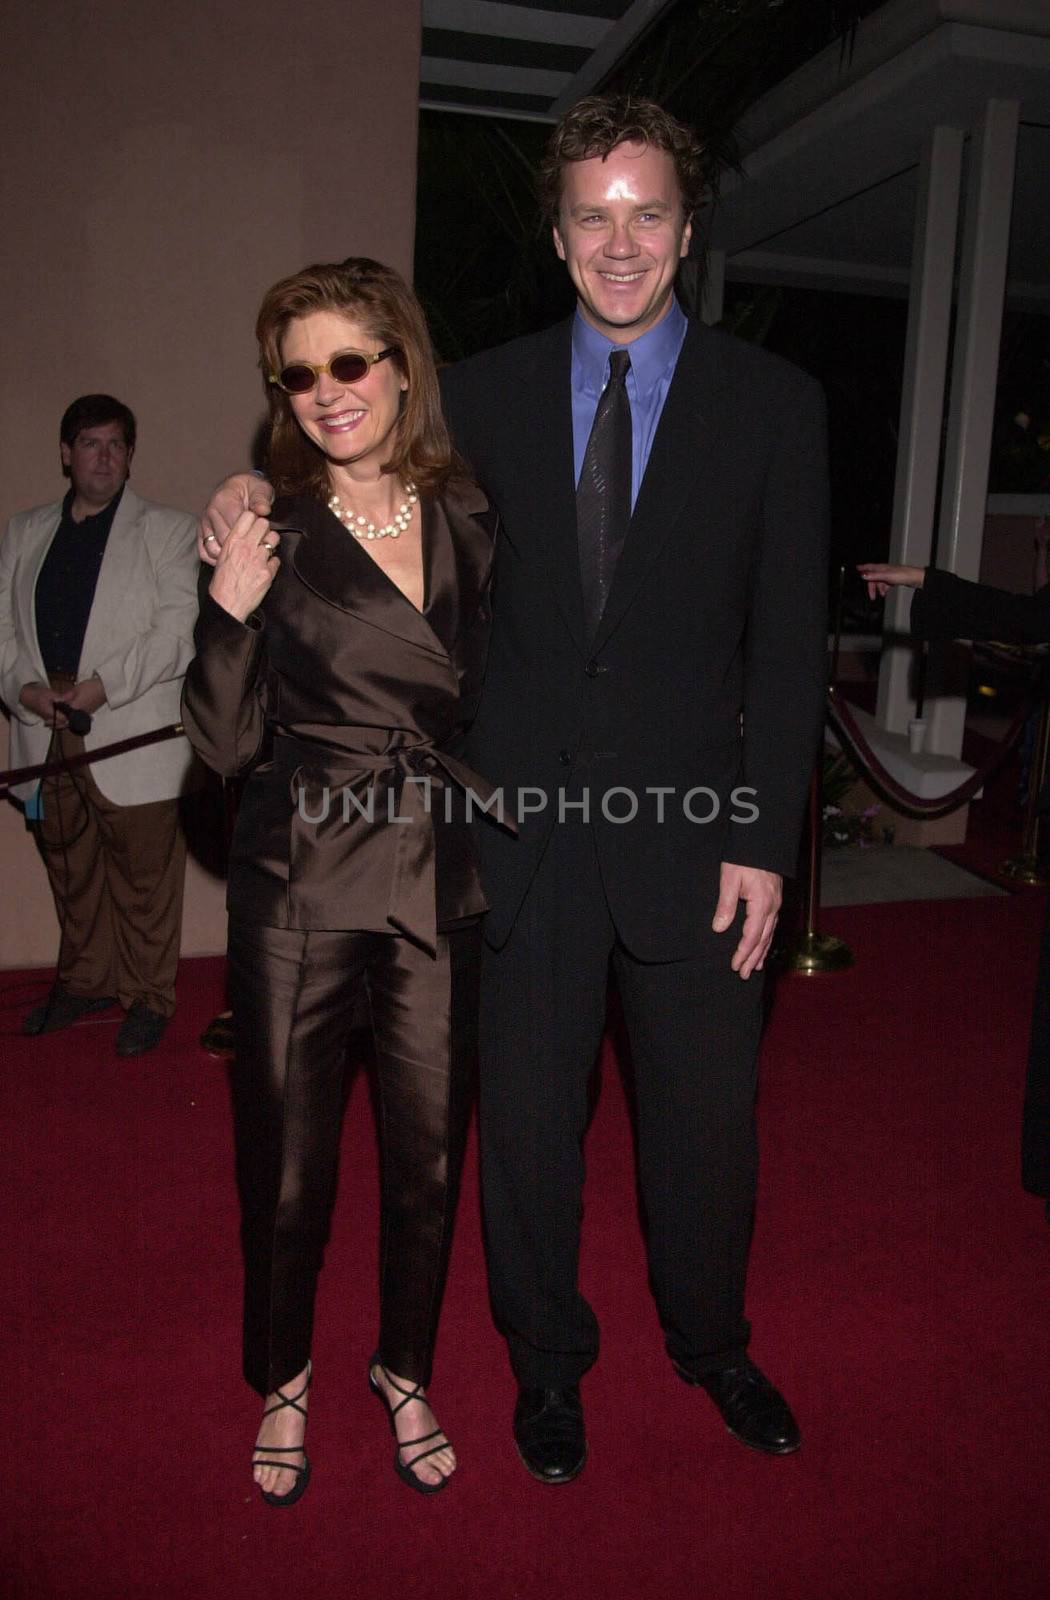 Susan Sarandon and Tim Robbins at the 4th Annual Raul Julia Ending Hunger Fund Benefit, Beverly Hills, 04-30-00